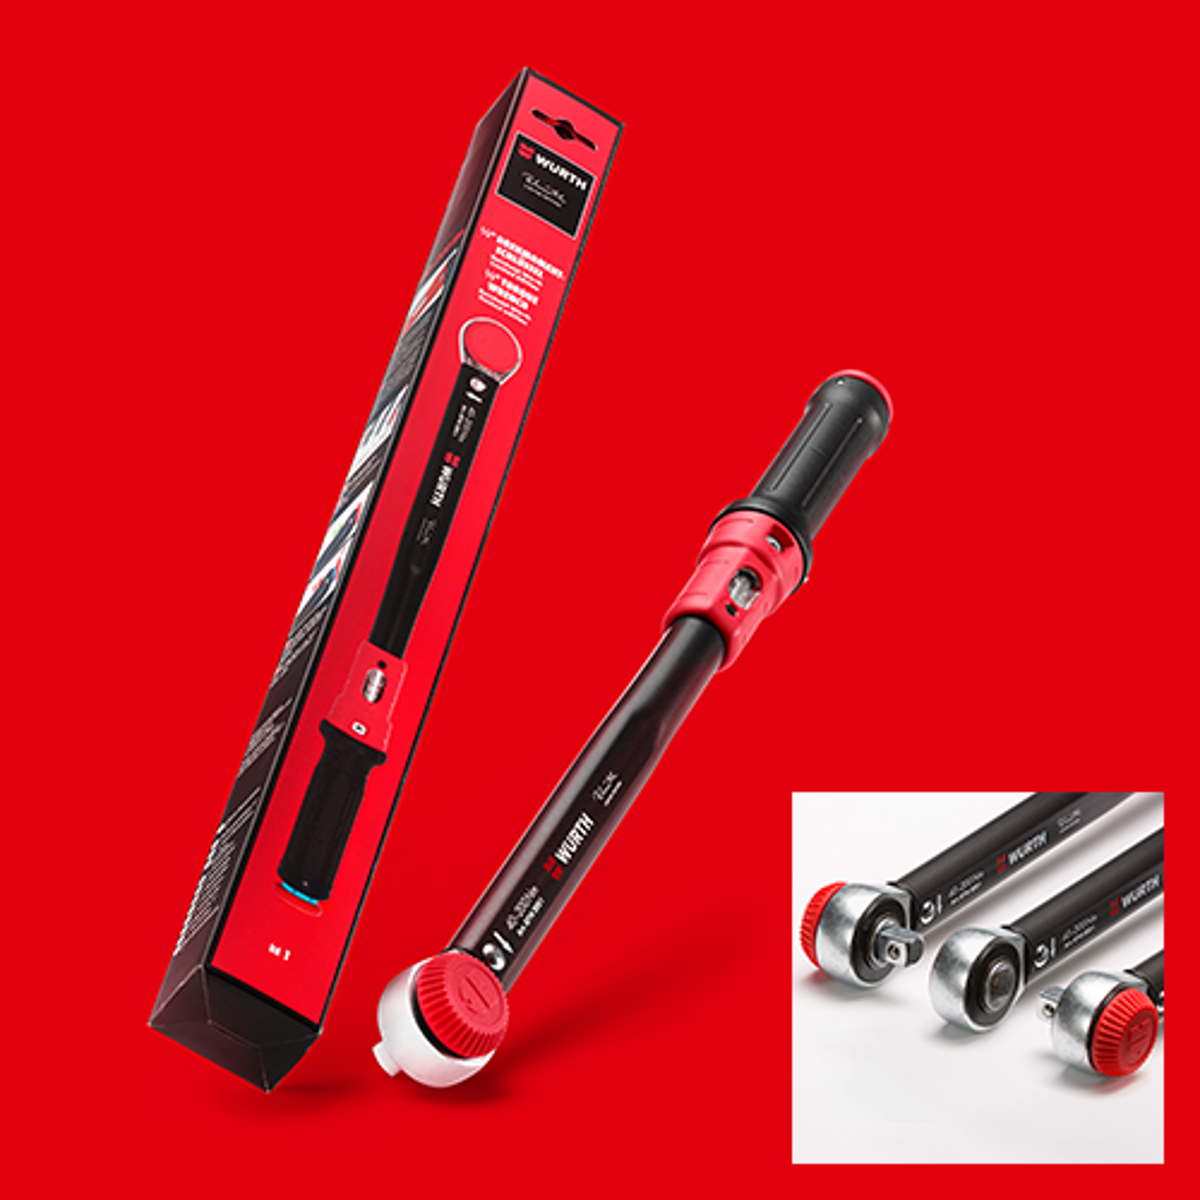 1 / 2 “Torque Wrench 40-200 NM